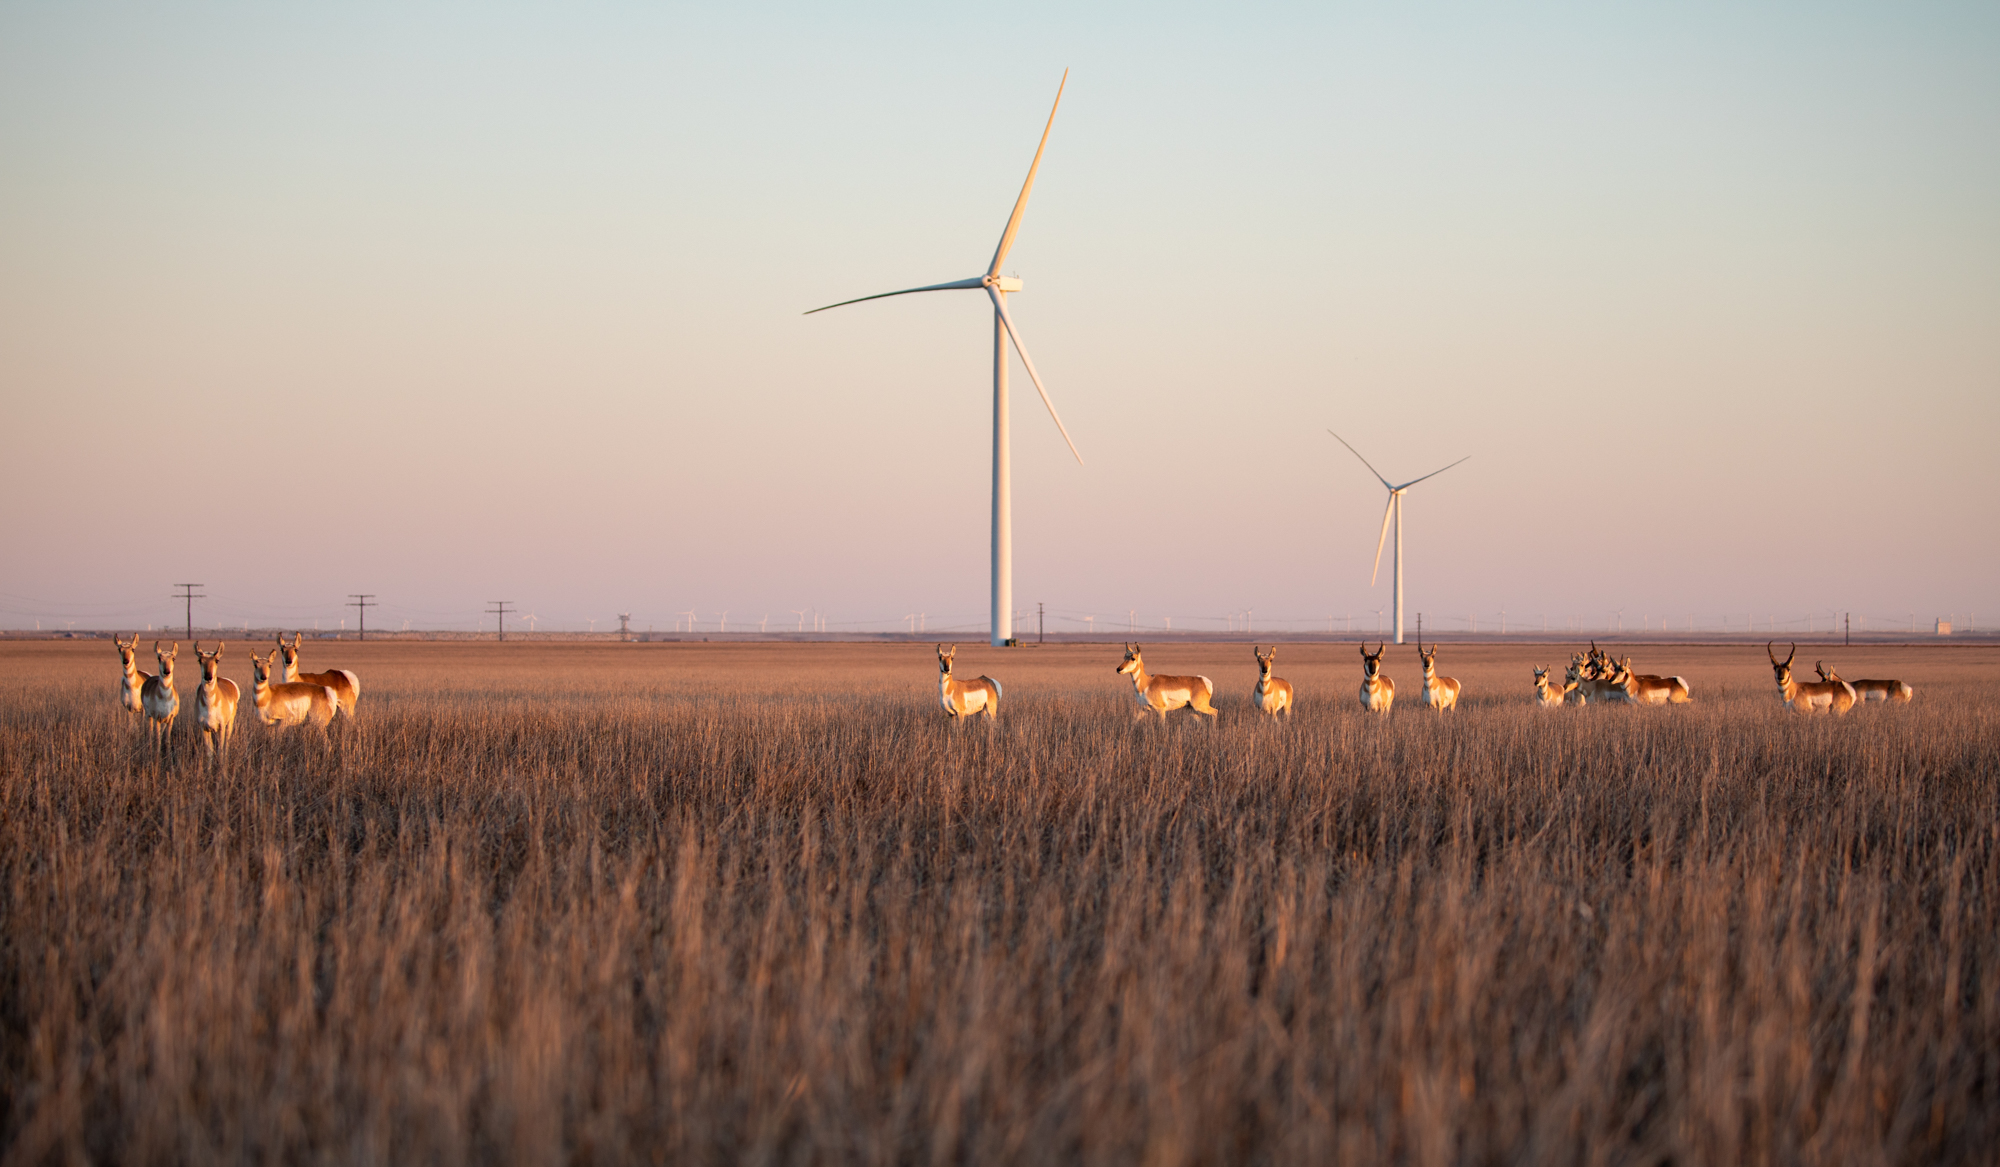 Can Wildlife and Clean Energy Coexist in the West?